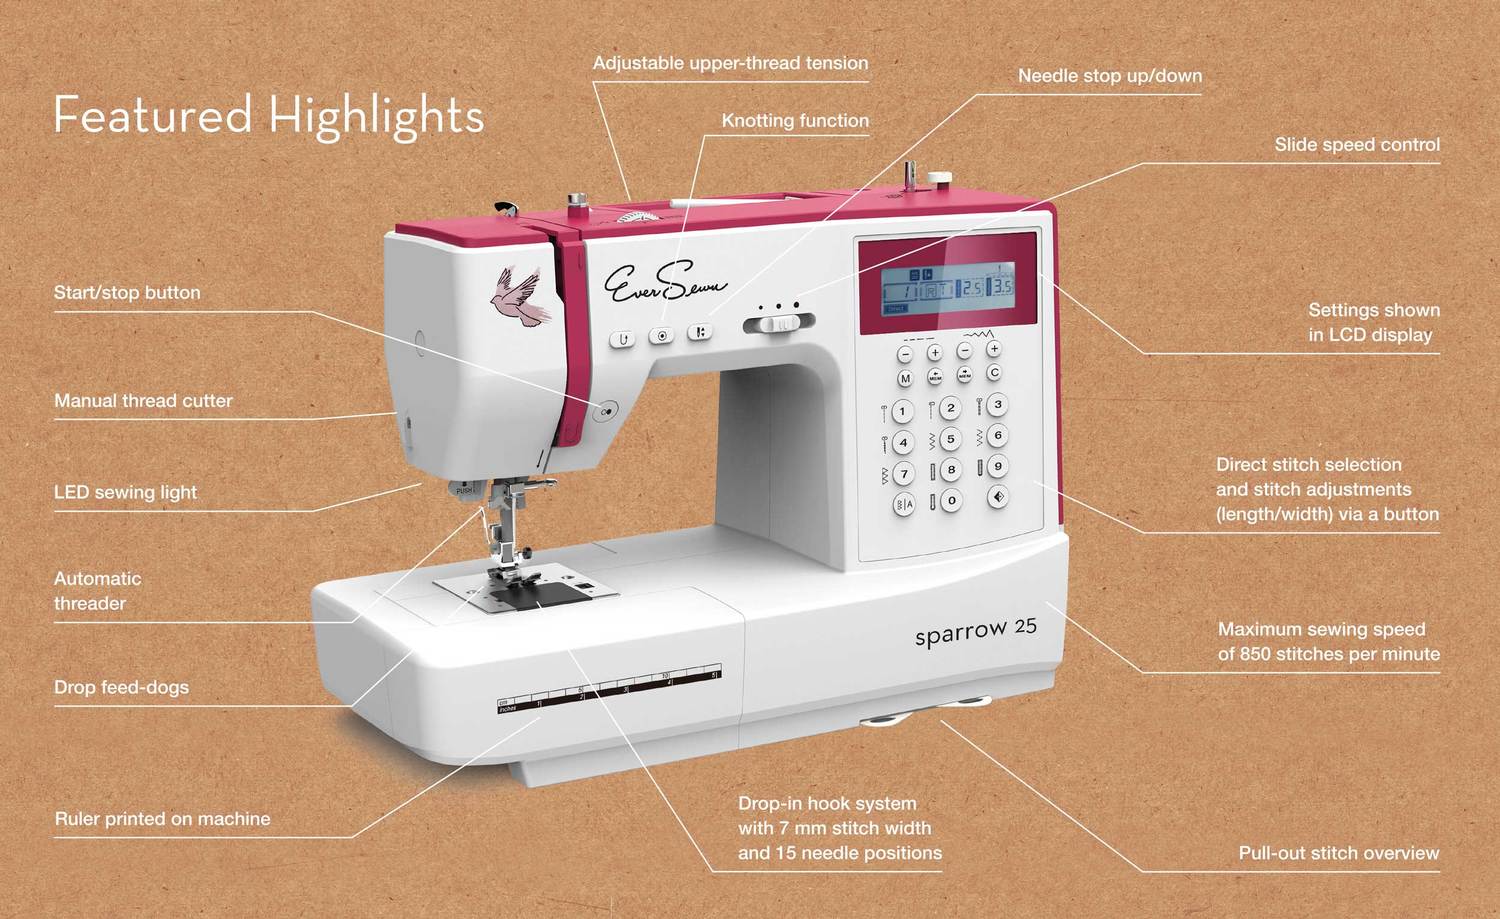 EverSewn Sparrow 25 197 Stitch Computerized Sewing Machine features